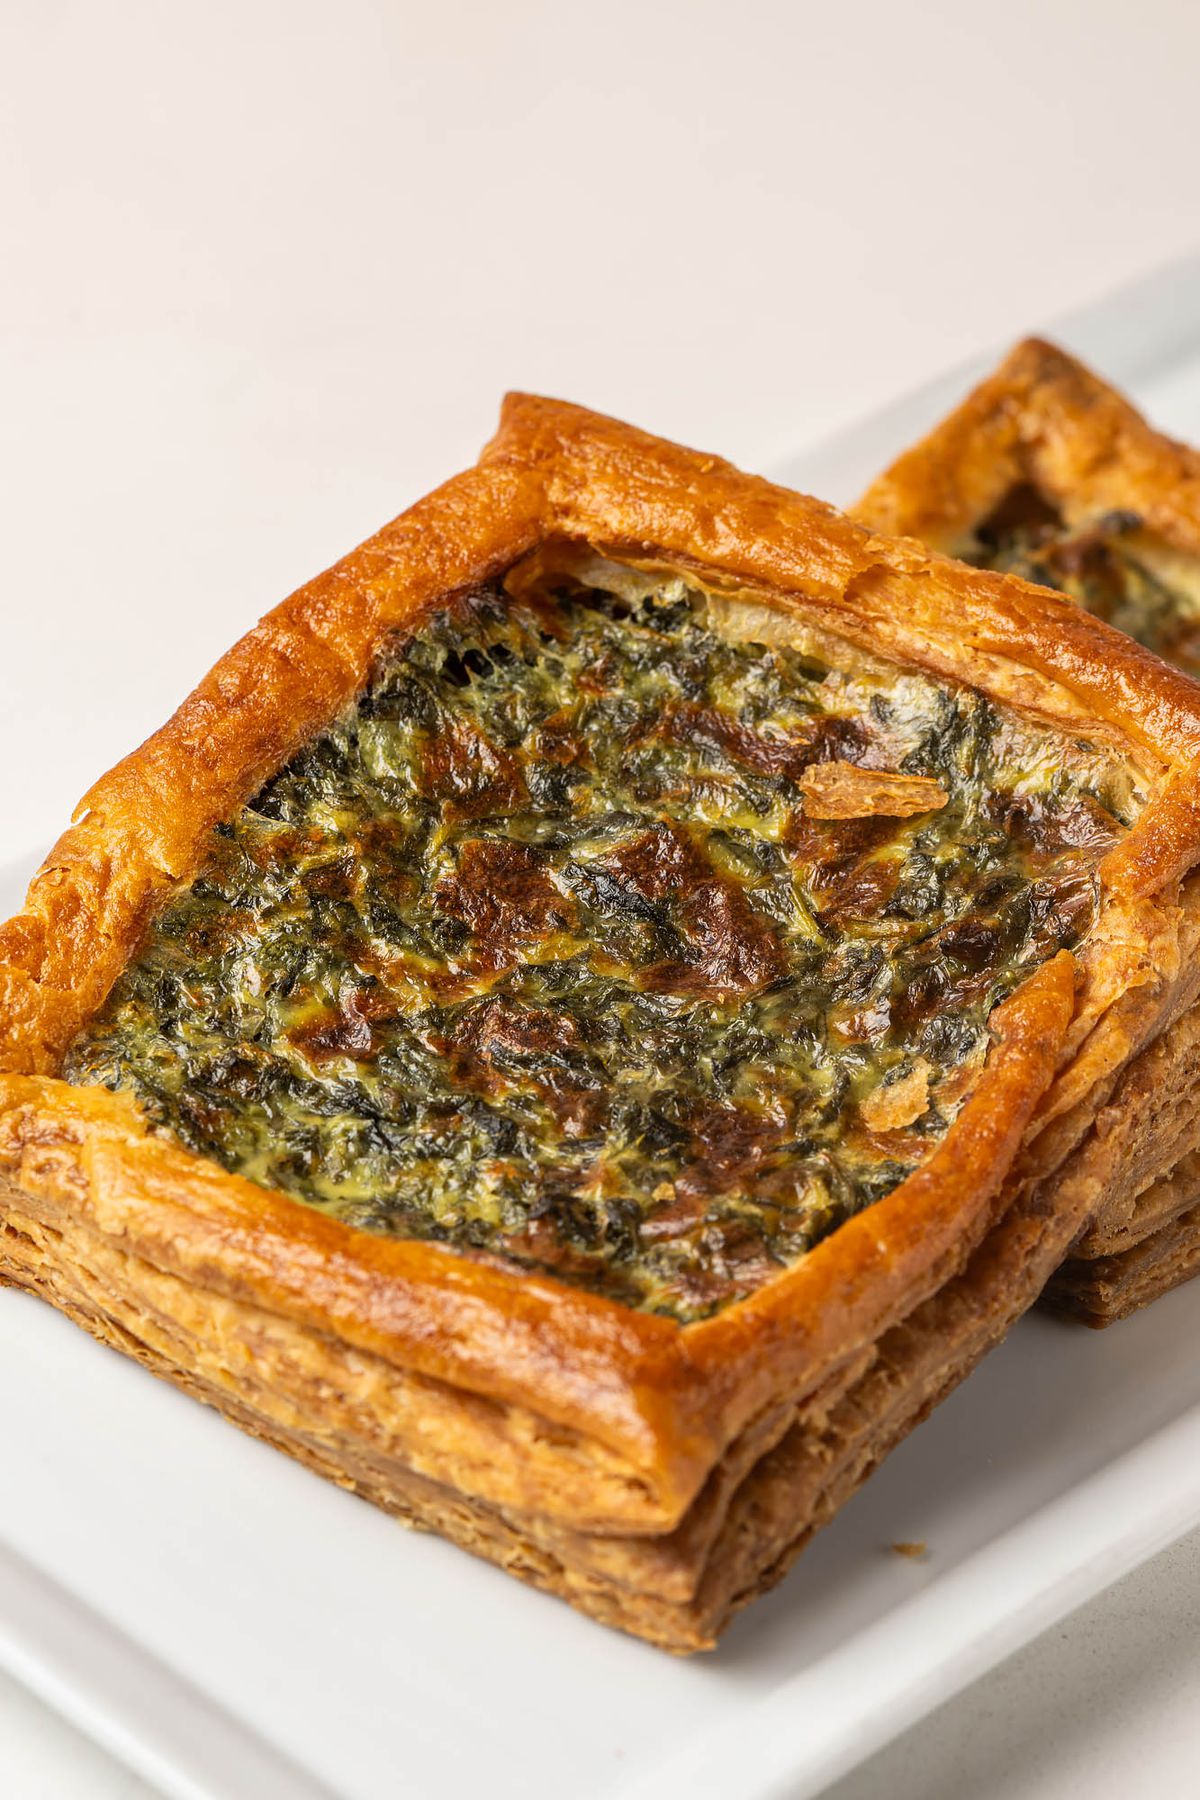 Greens cooked down inside of a wide, square pastry cooked to a dark brown on a white tray at an LA bakery.